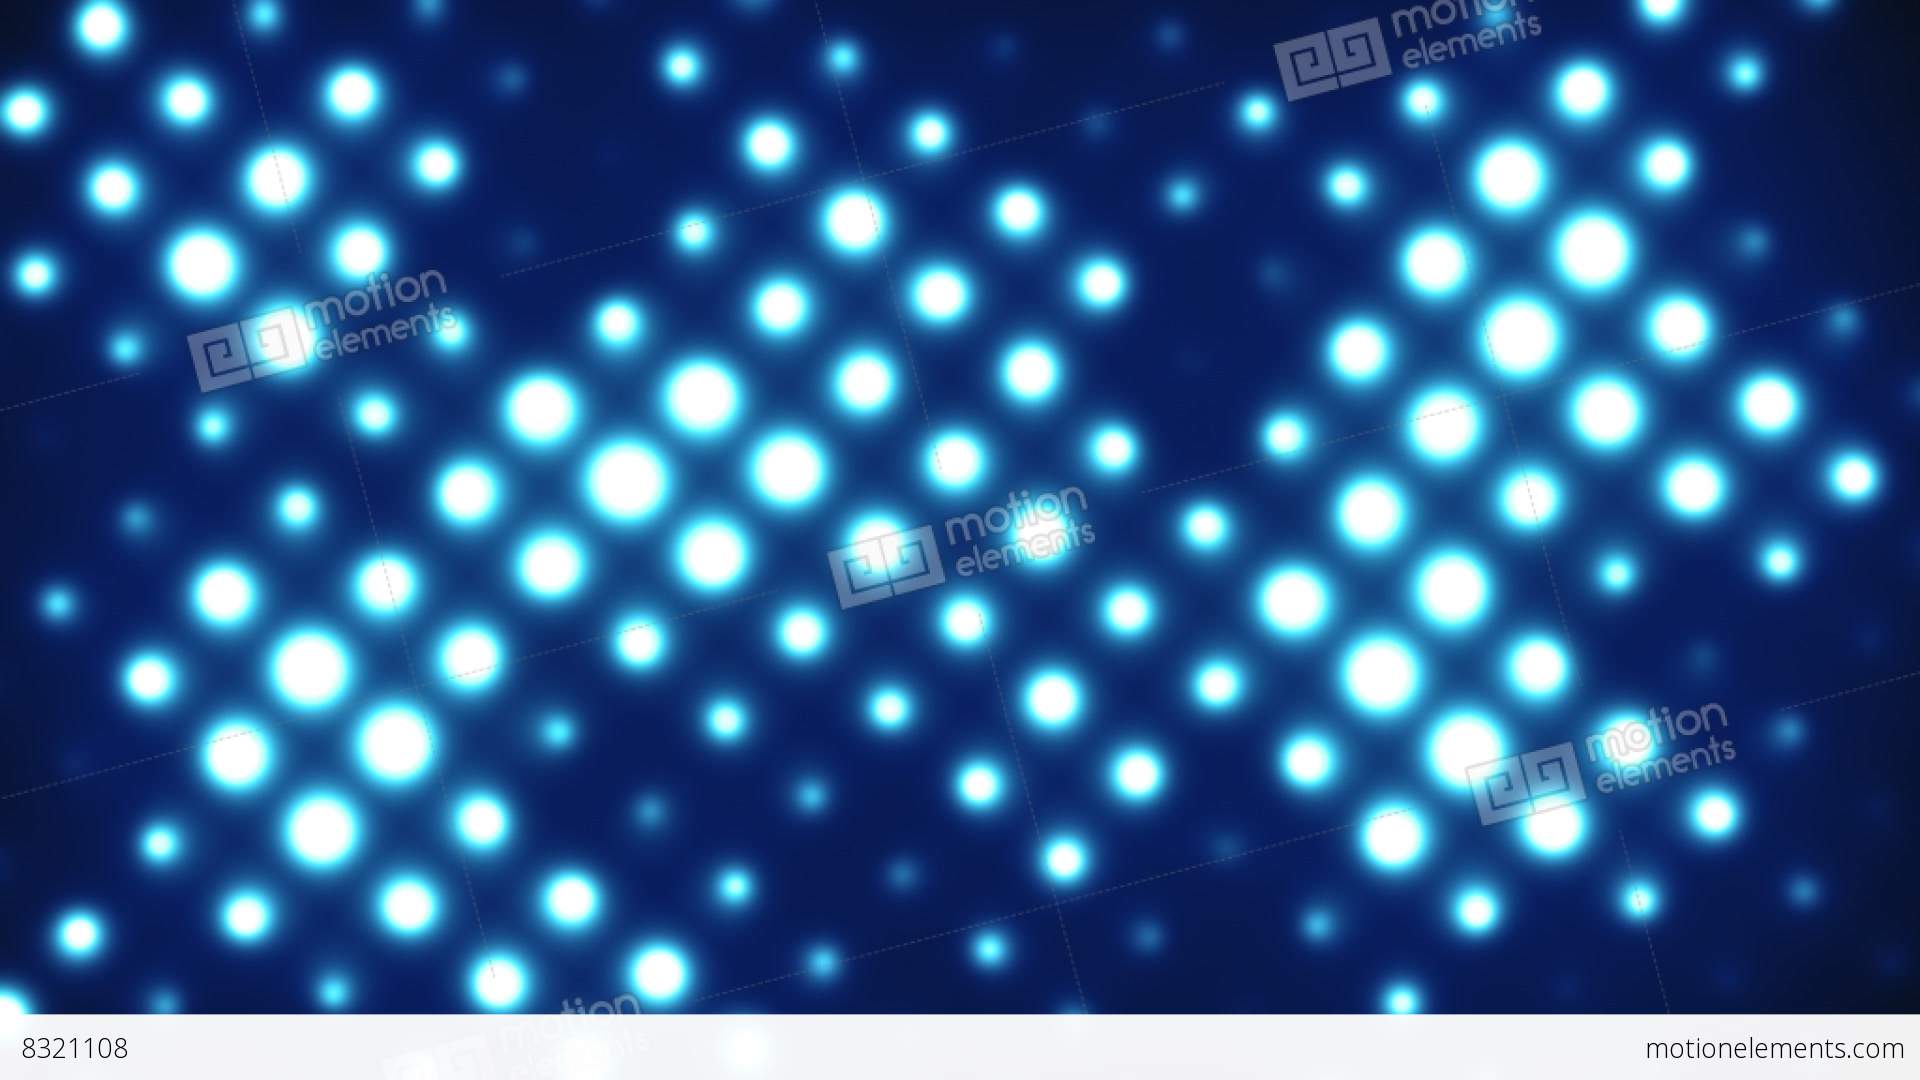 Dj Dance Party Circular Lights 2- Loopable Background Stock